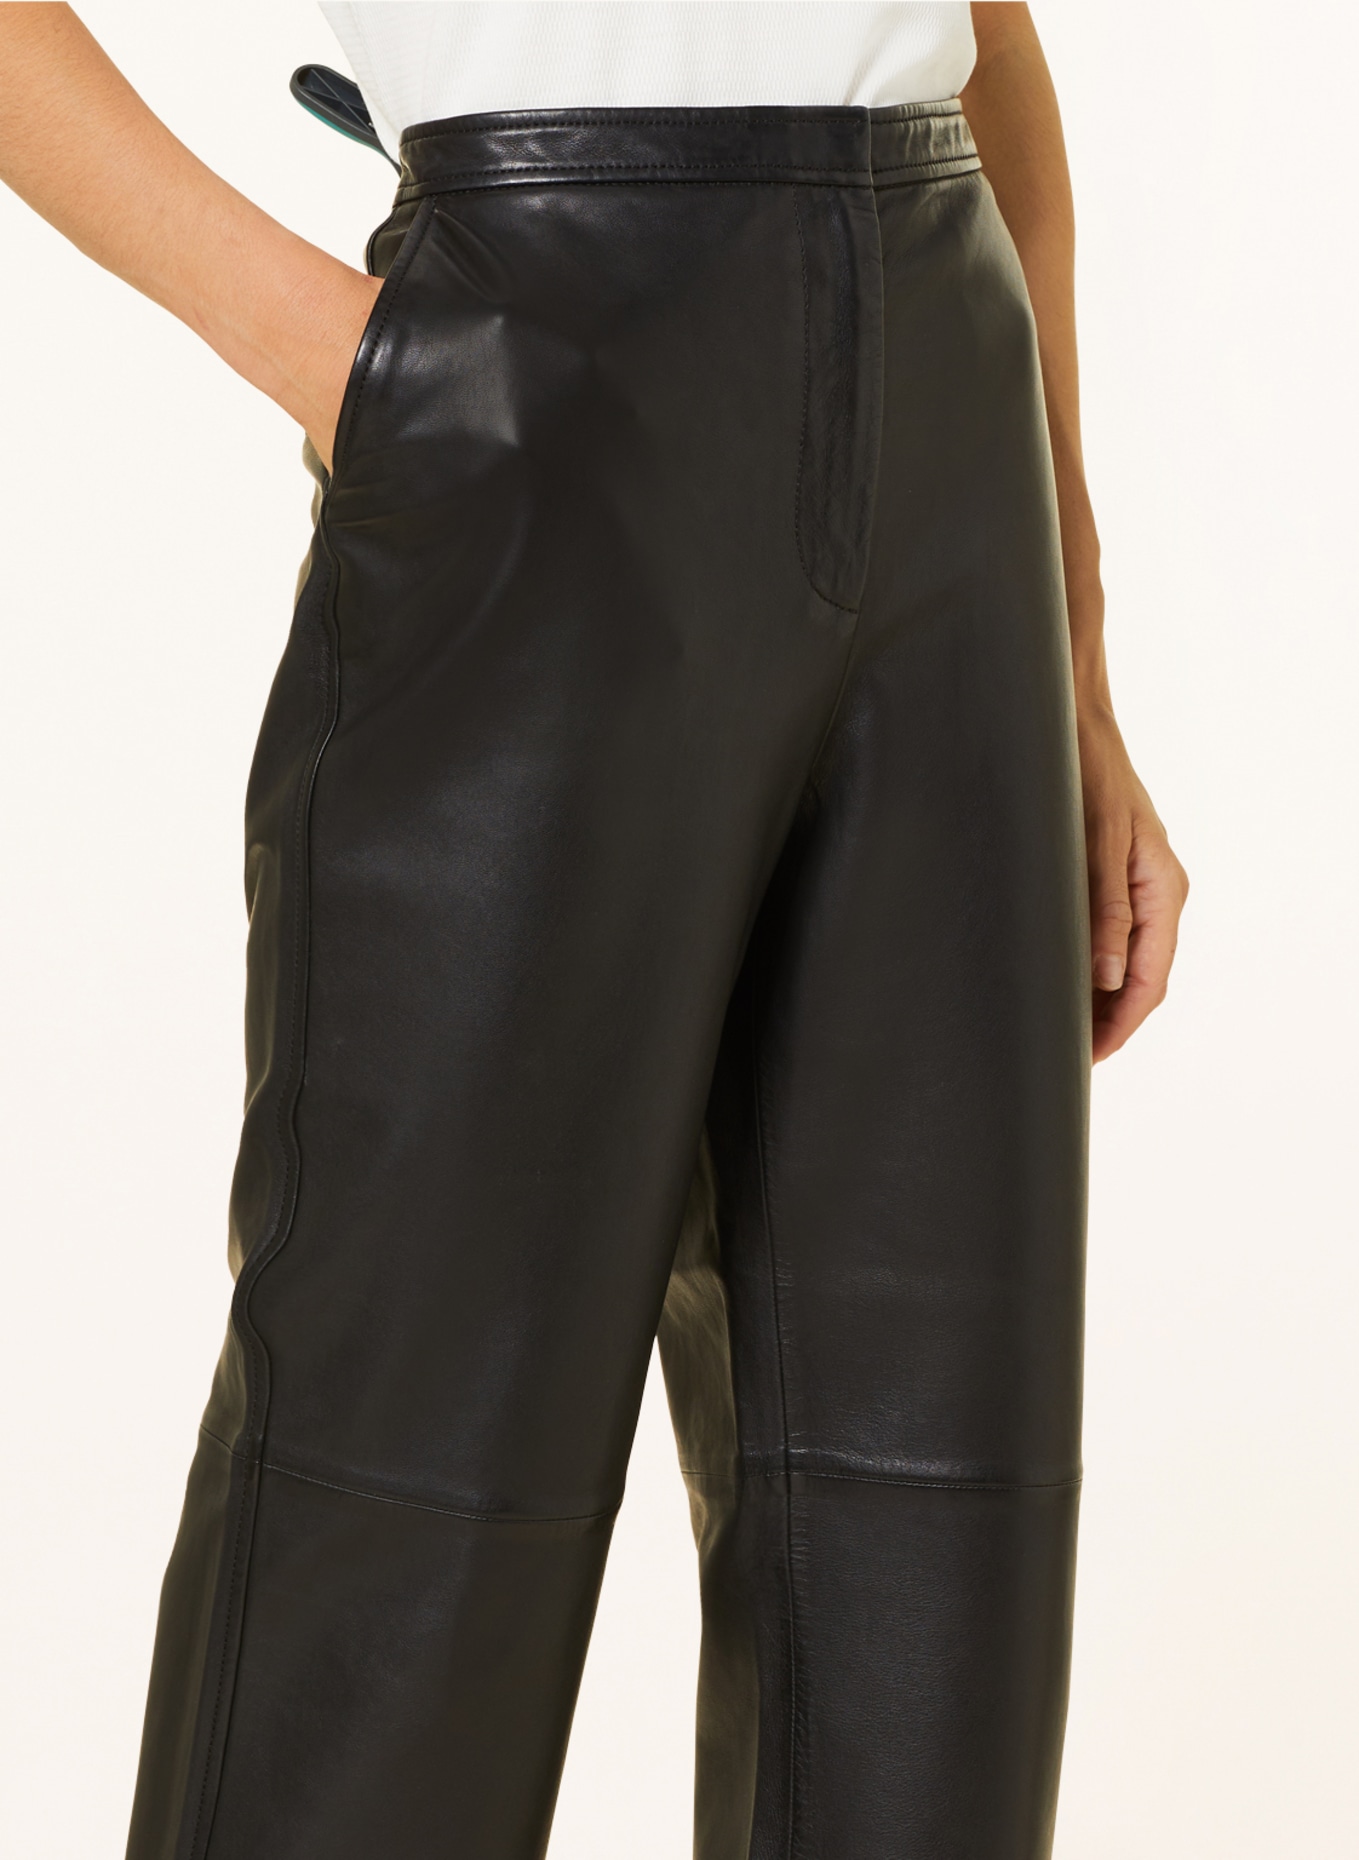 Marc O'Polo 7/8 trousers made of leather, Color: BLACK (Image 5)